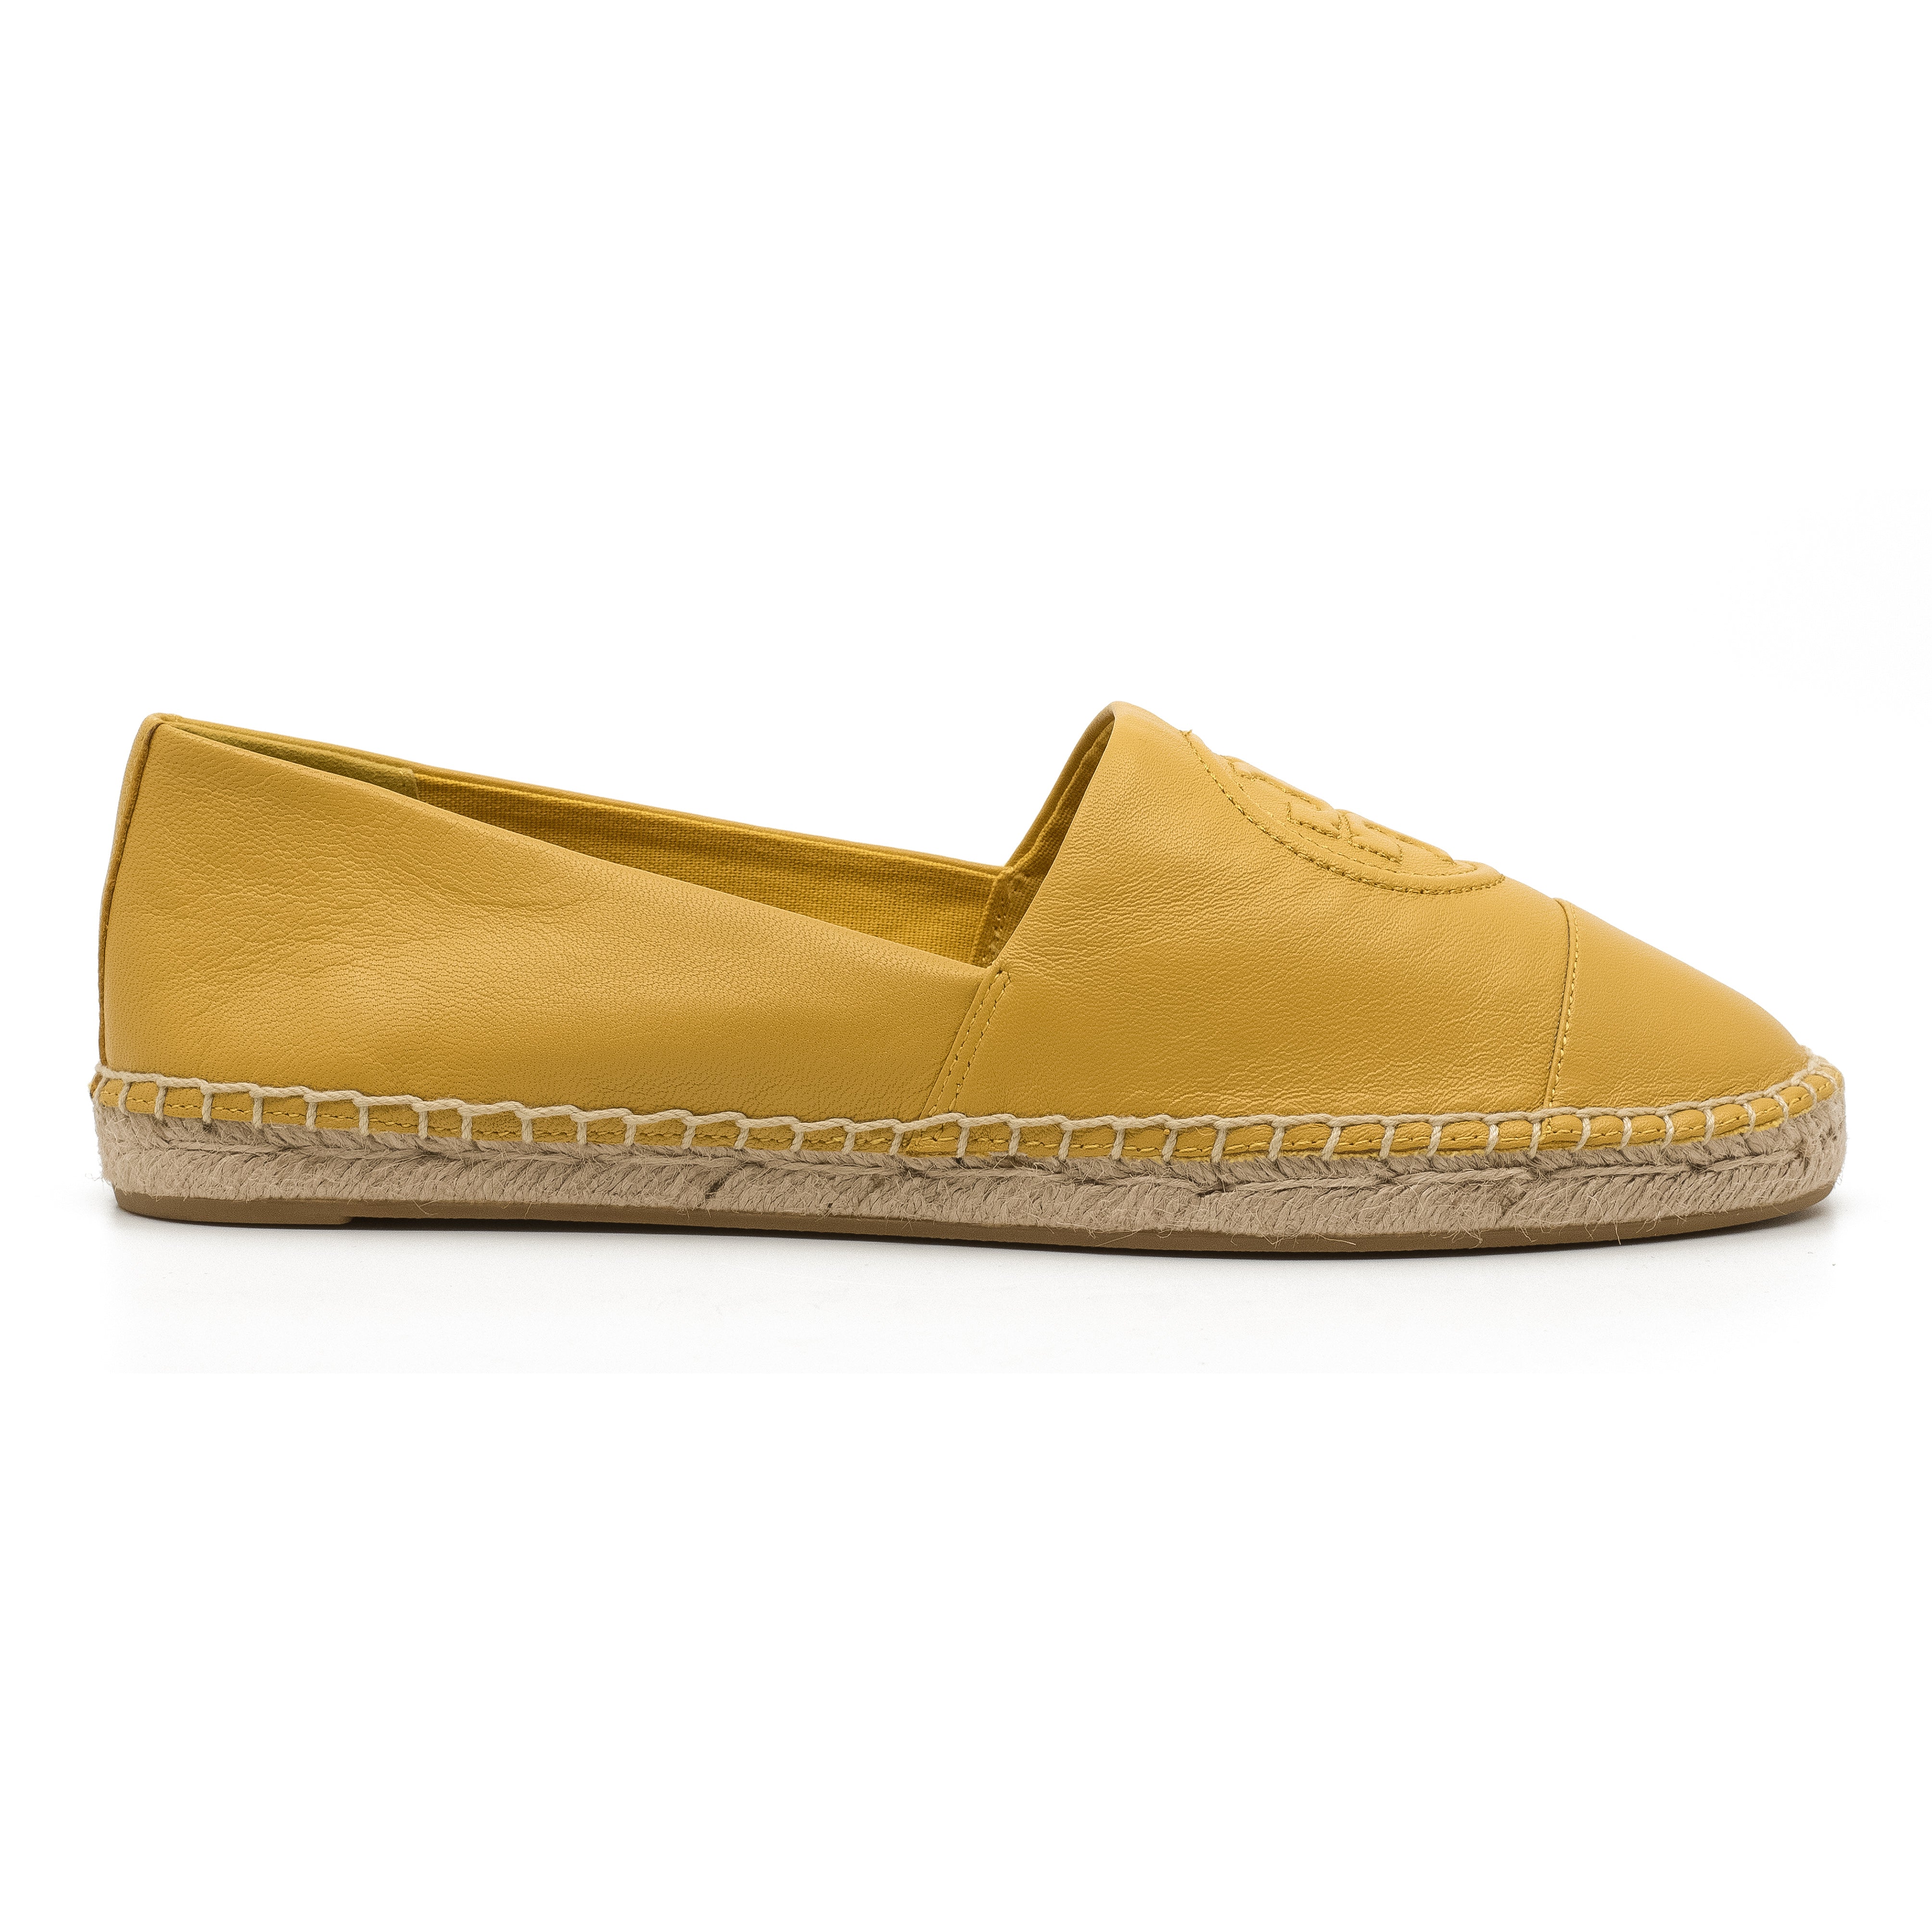 TORY BURCH BENTON COLOR BLOCK ESPADRILLE IN DAY LILY||74078-700 BY TORY  BURCH – Galleria di Lux Canada